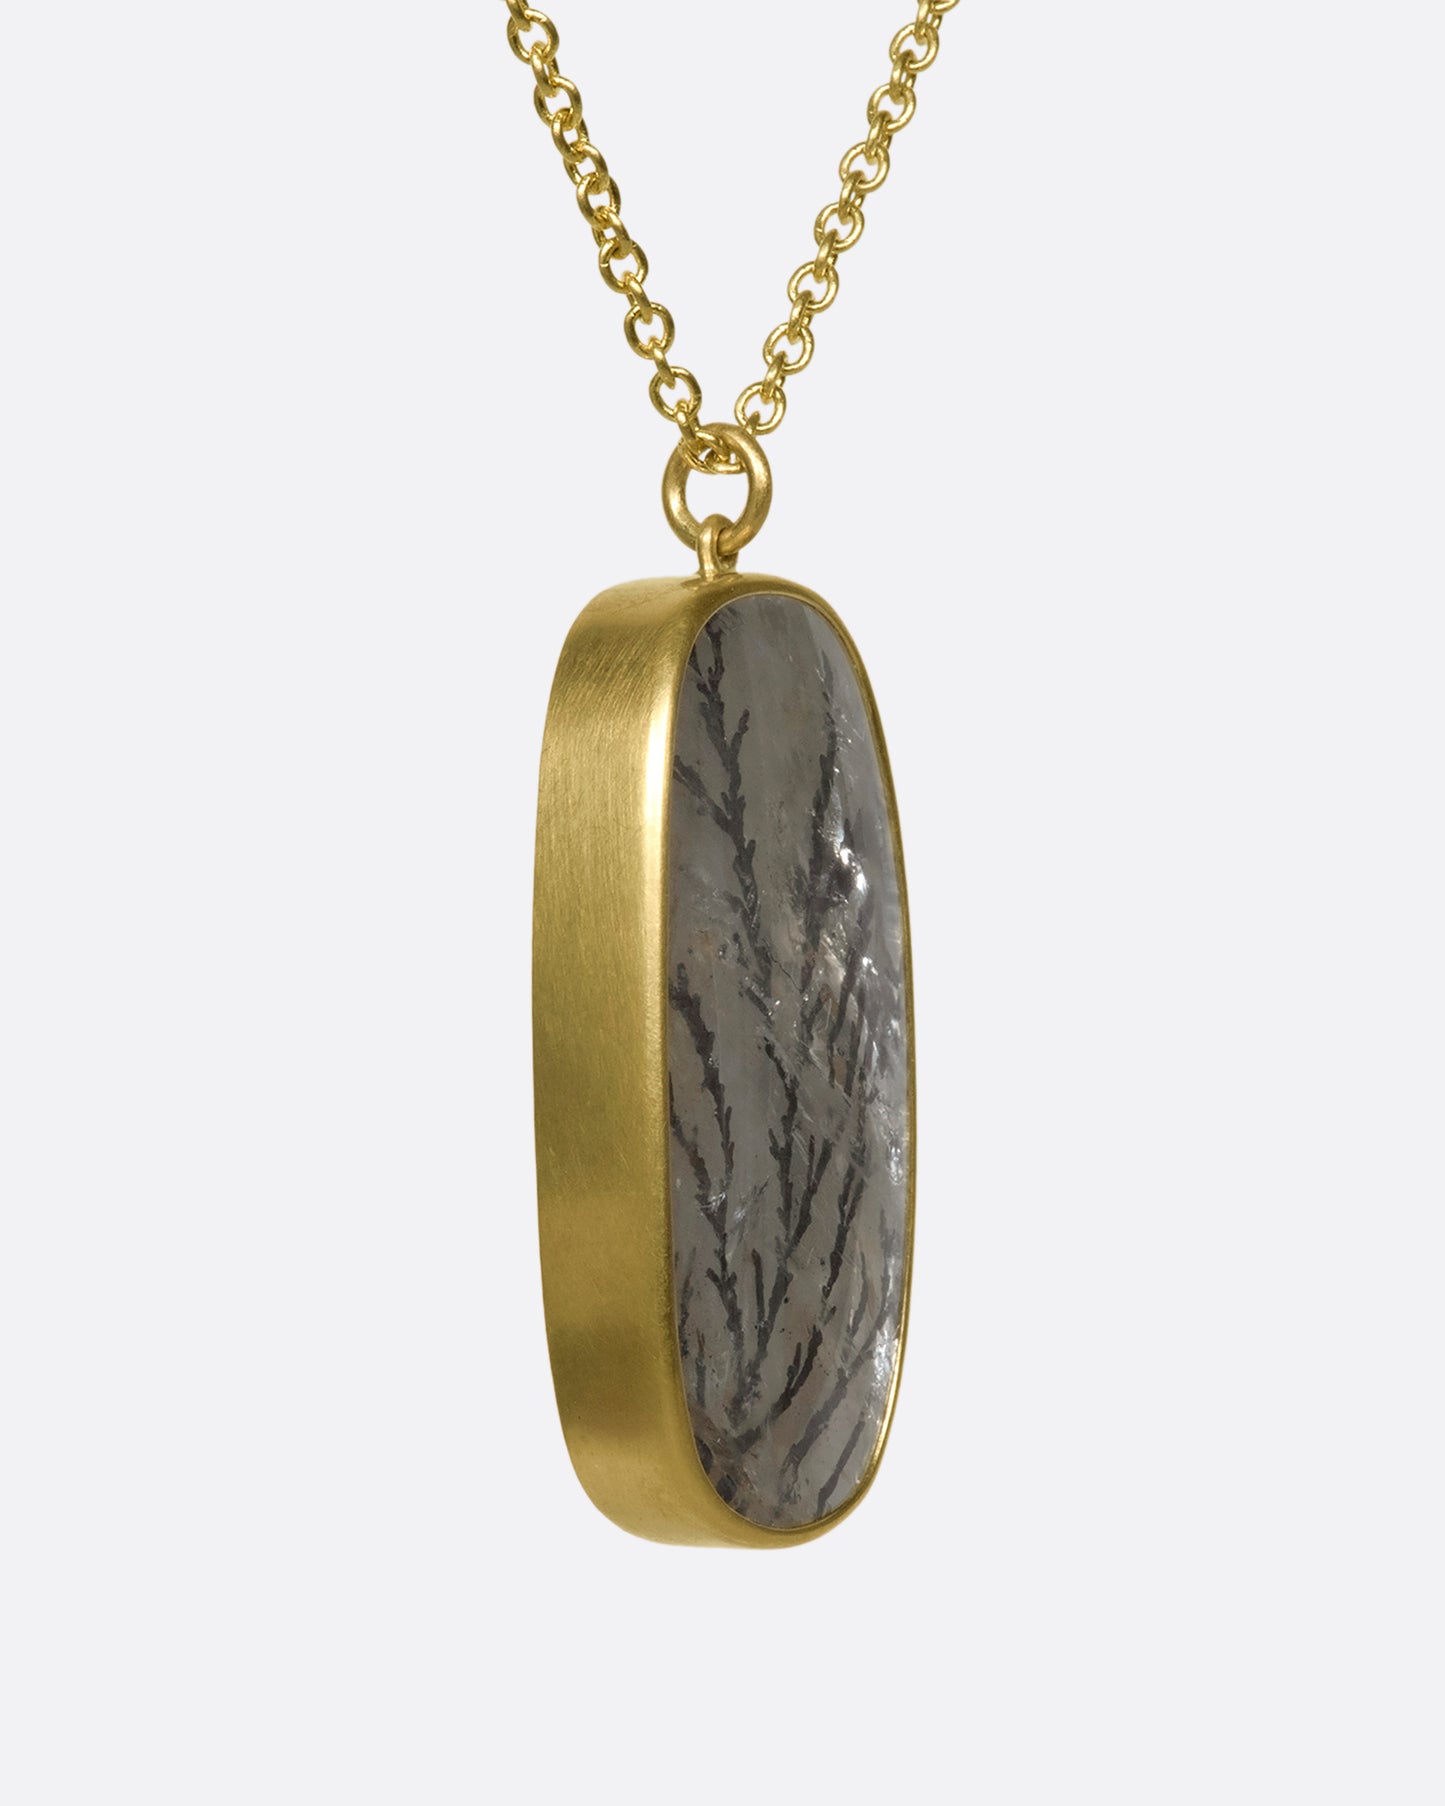 A side view of a hanging dendritic quartz pendant on a yellow gold chain.